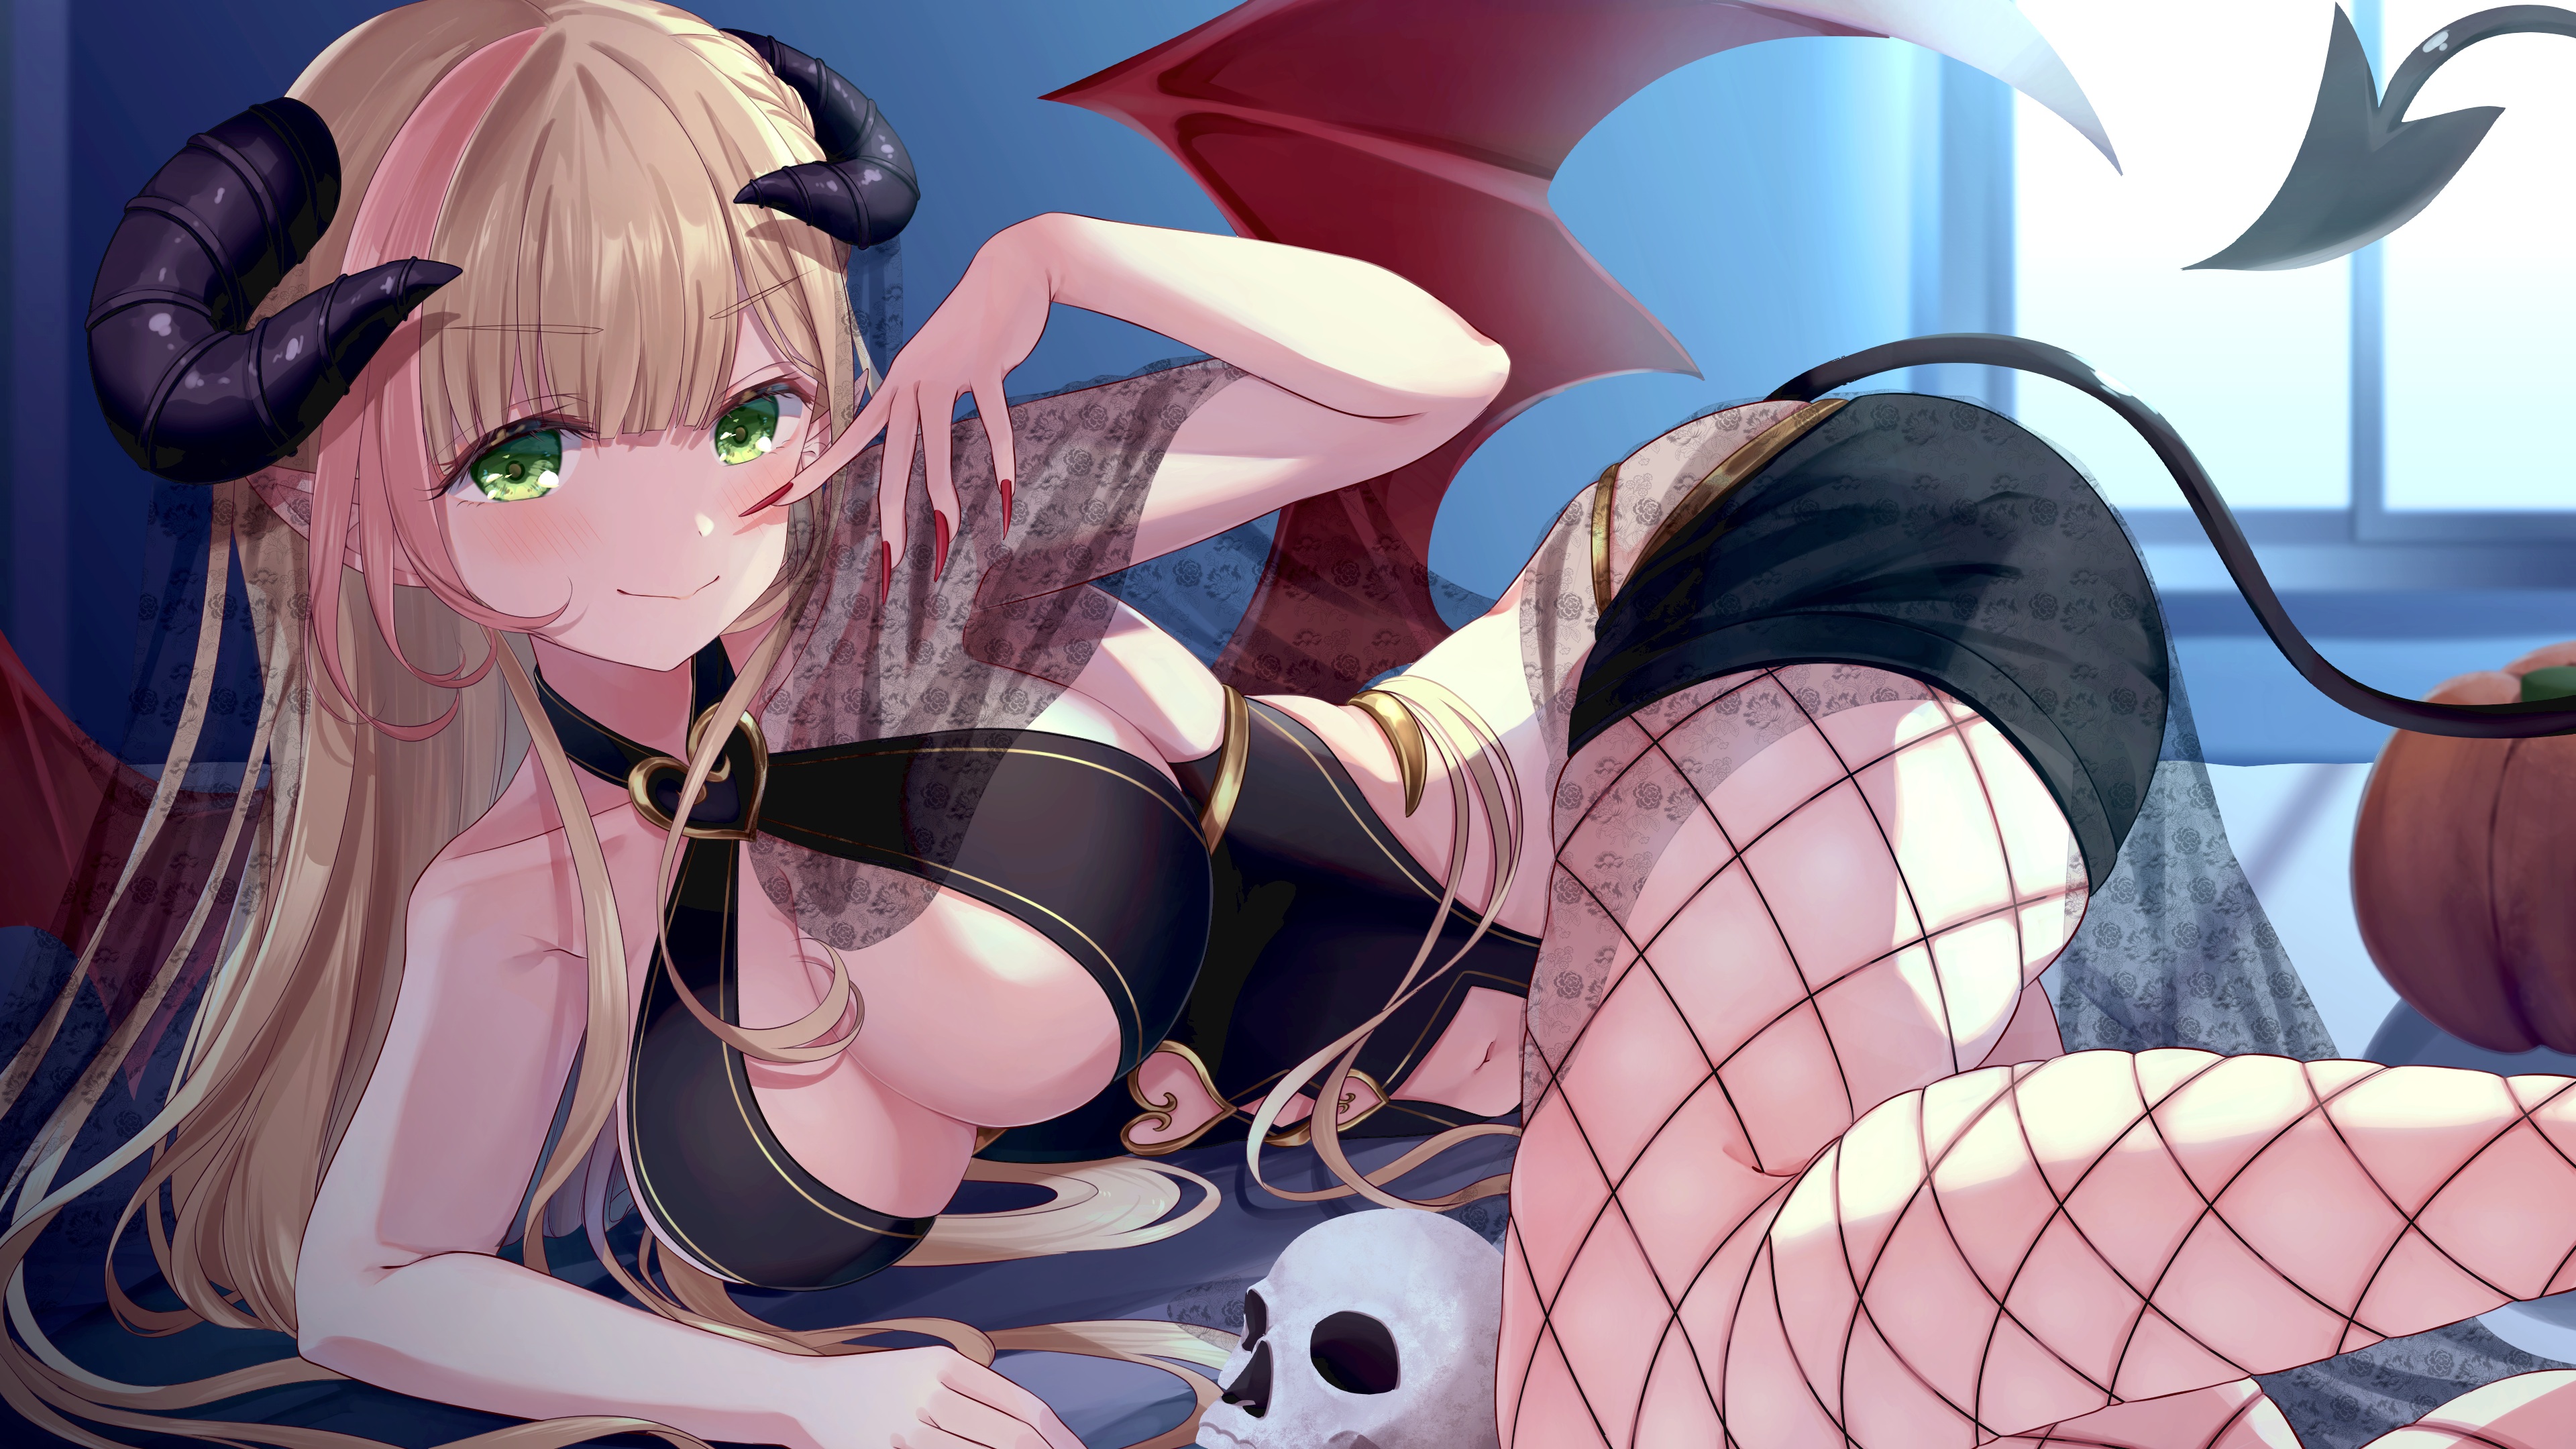 Anime 3840x2160 anime anime girls fishnet demon girls horns demon tail green eyes blonde cleavage big boobs bat wings skull pumpkin wings red nails belly button smiling